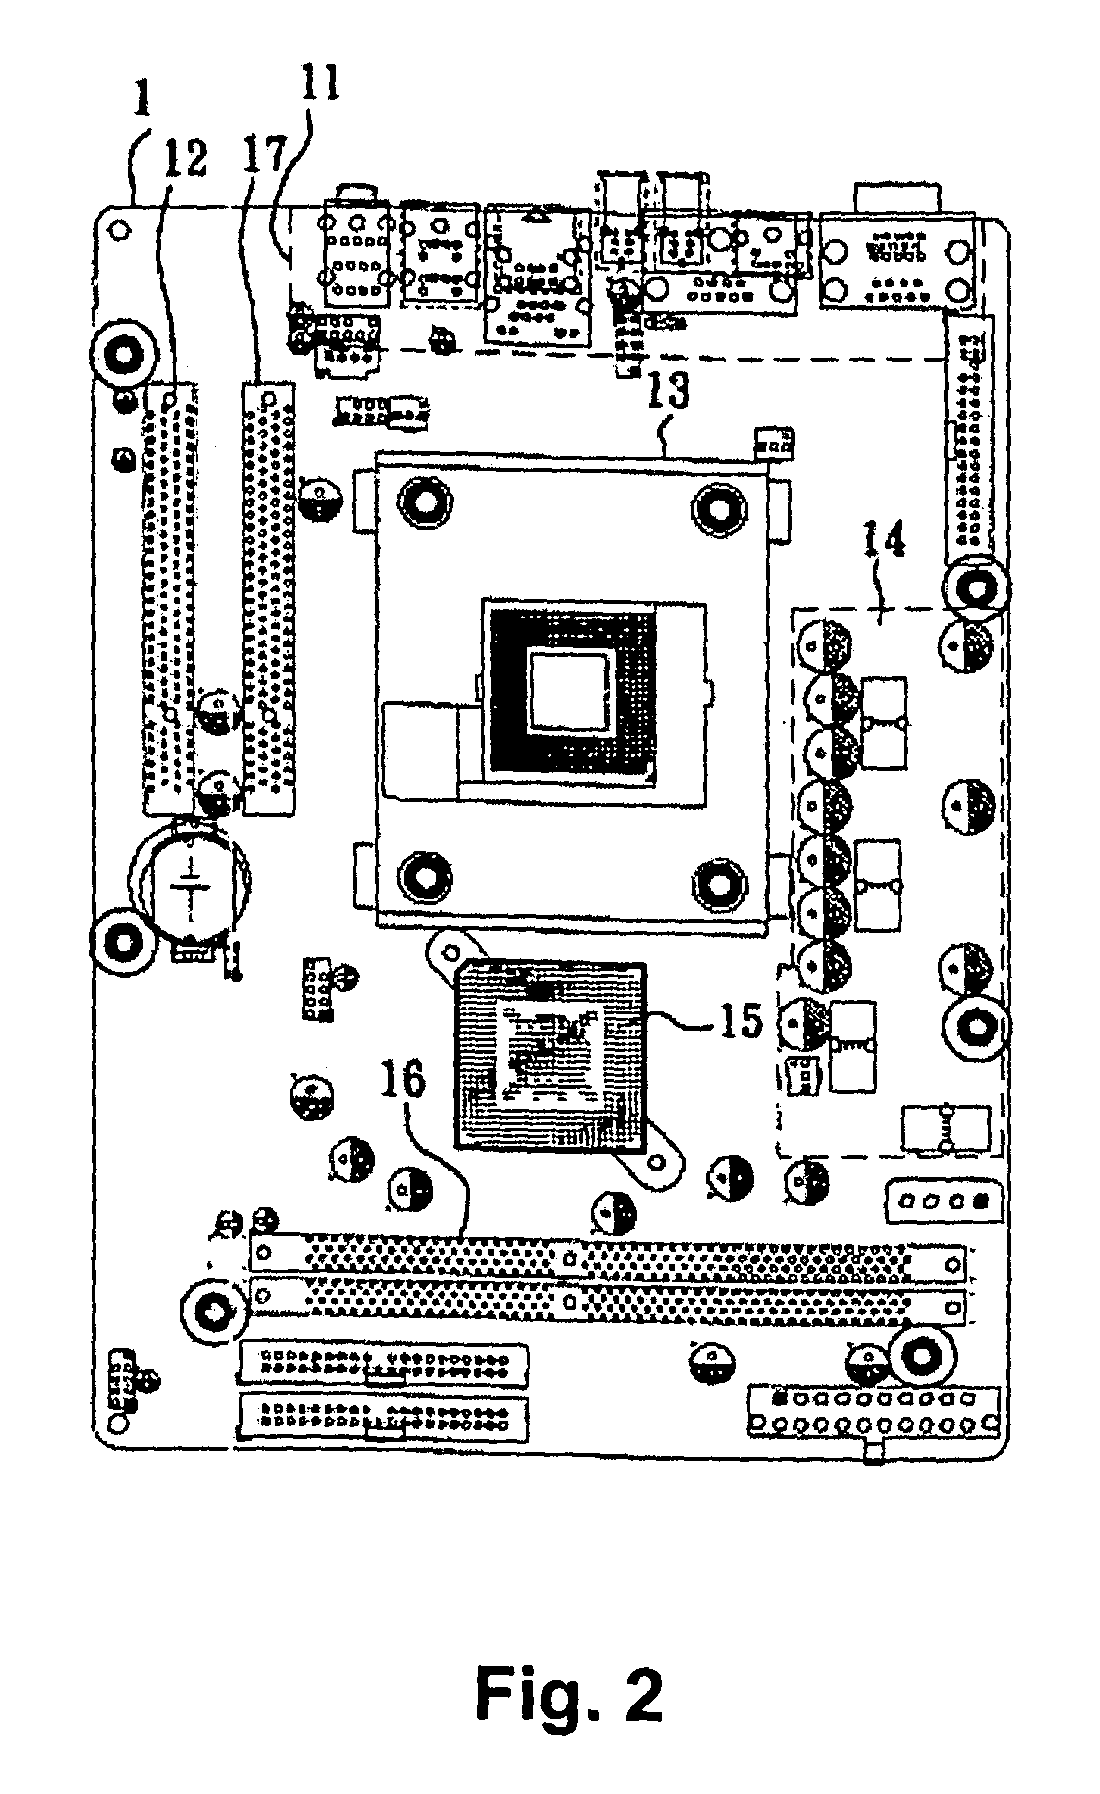 Placement structure of an integrated motherboard for small form factor computer